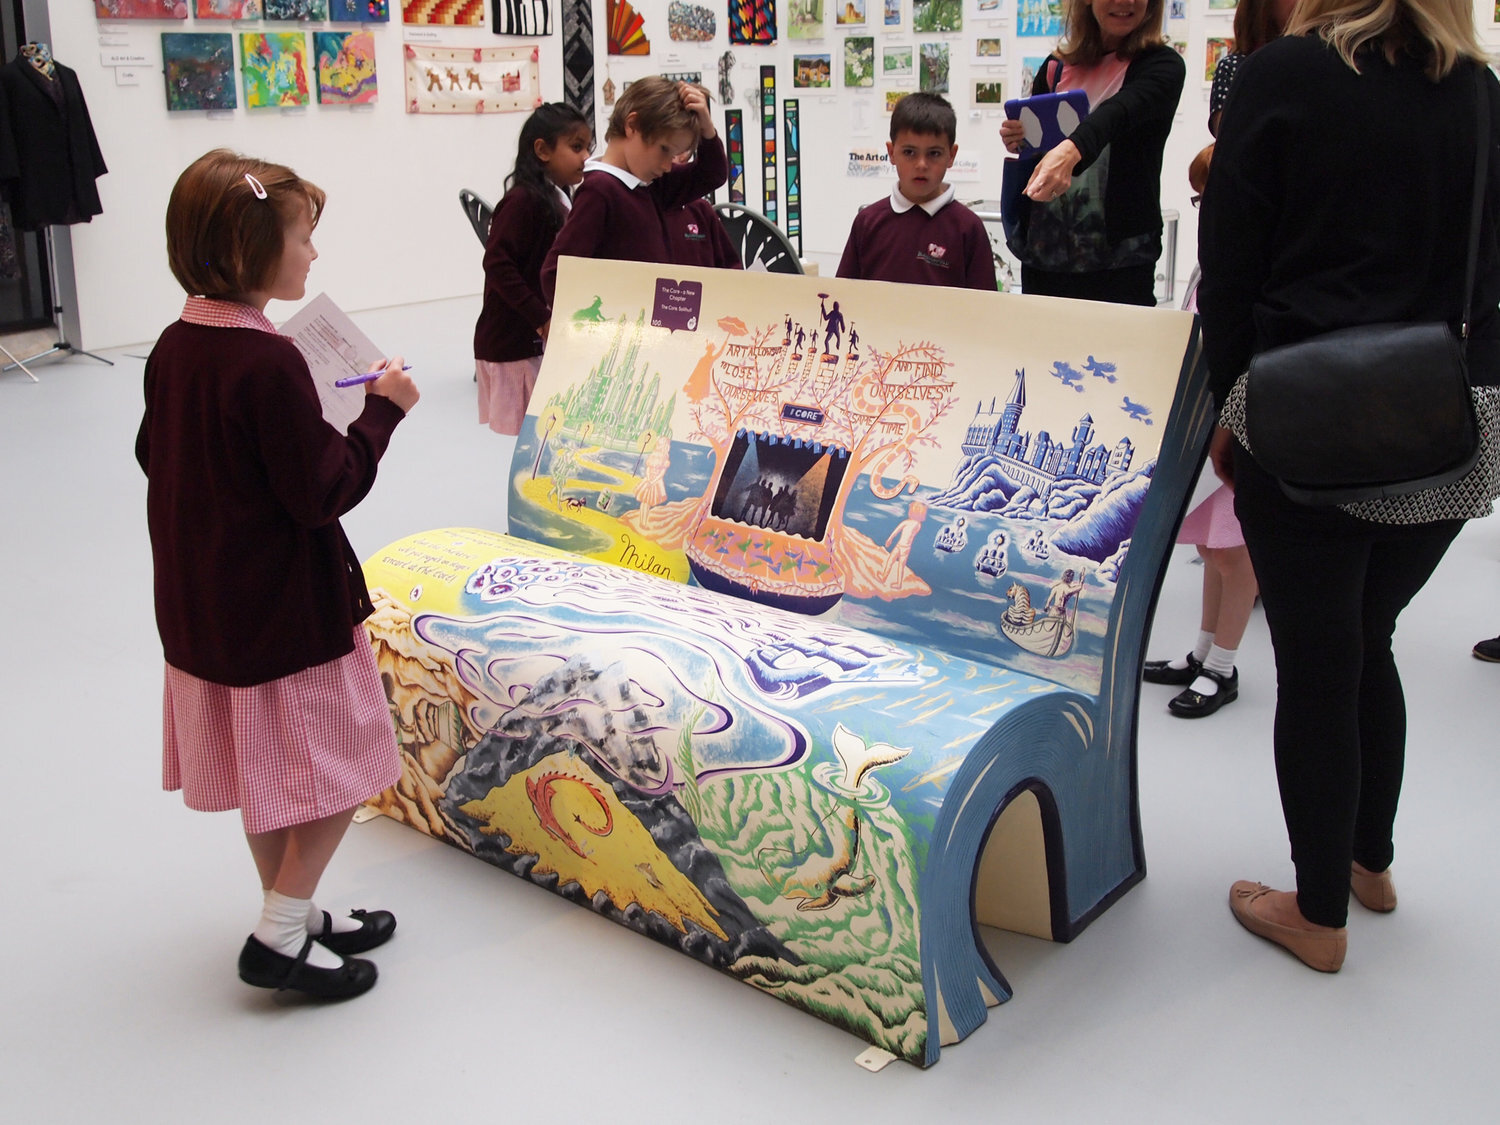 'The Next Chapter' book bench